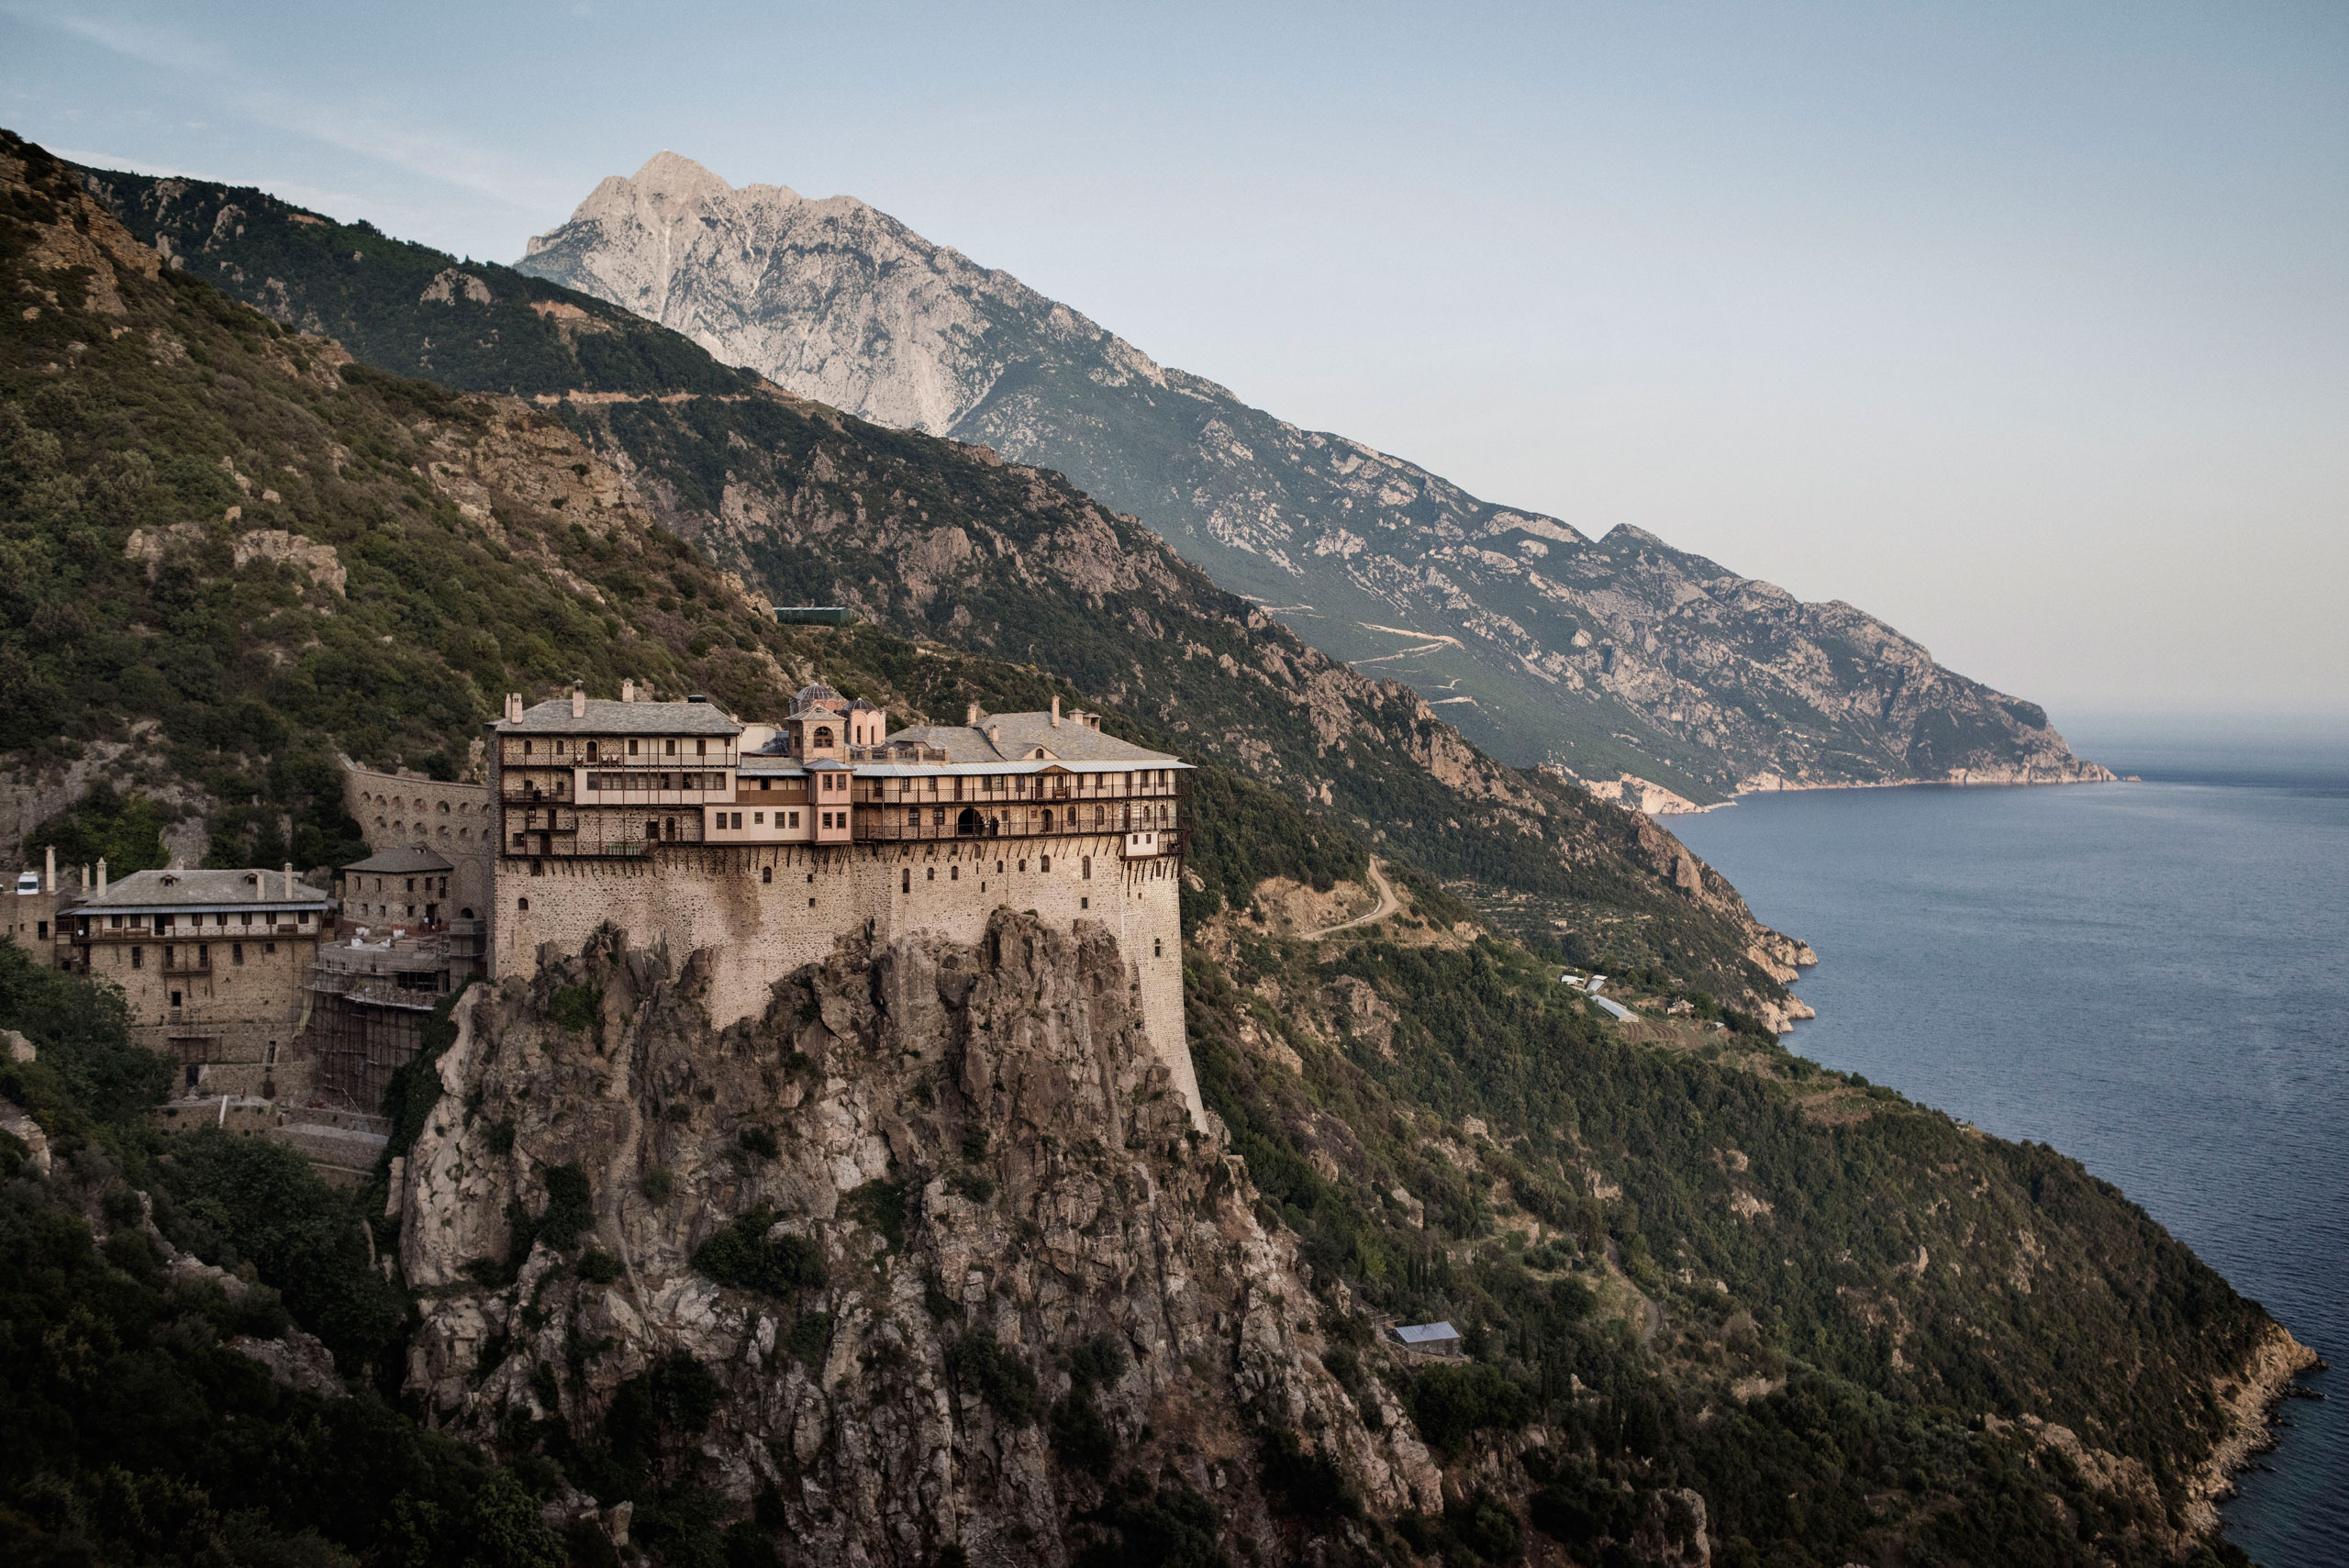 The Eastern Orthodox Monastery of Simonopetra, founded in the 13th century, perched on a cliff above the Aegean Sea in the monastic state of Mount Athos, in northern Greece, May 30, 2016.